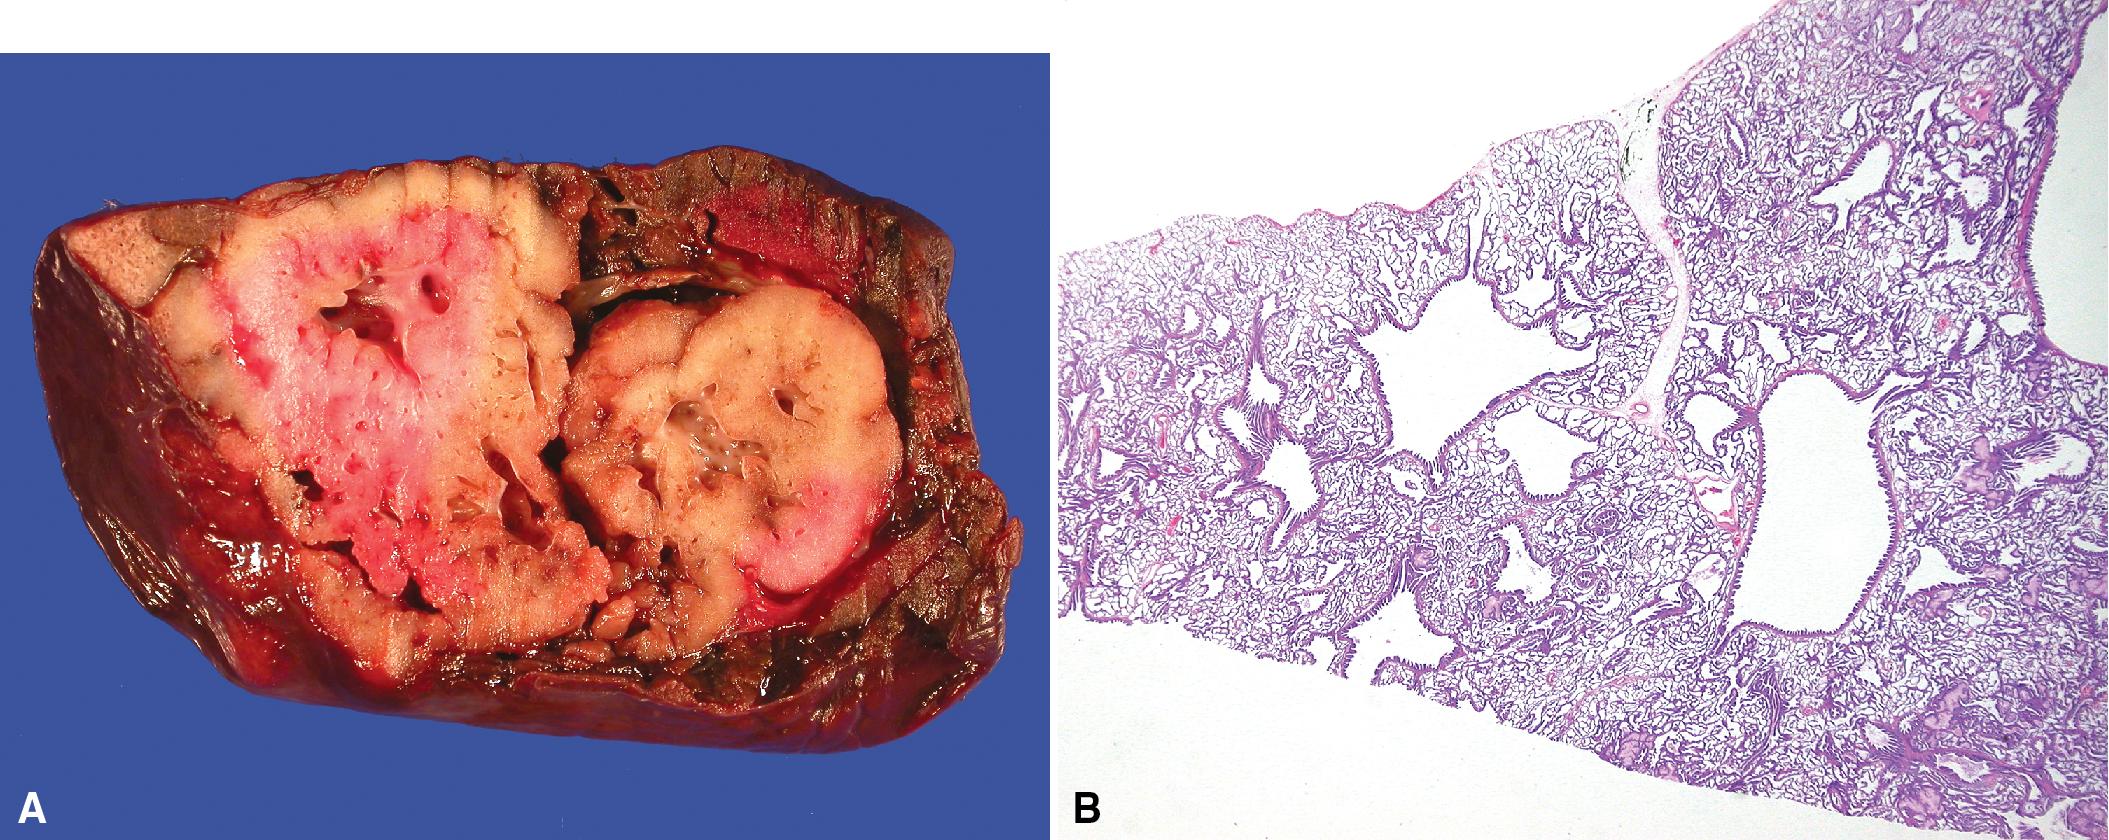 Figure 5.8, Congenital pulmonary airway malformation. (A) Grossly, this congenital pulmonary airway malformation shows a spongy mass of abnormal tissue replacing the lobe. (B) The abnormally developed parenchyma shows dilated bronchiolar structures surrounded by elongated hyperplastic air spaces.